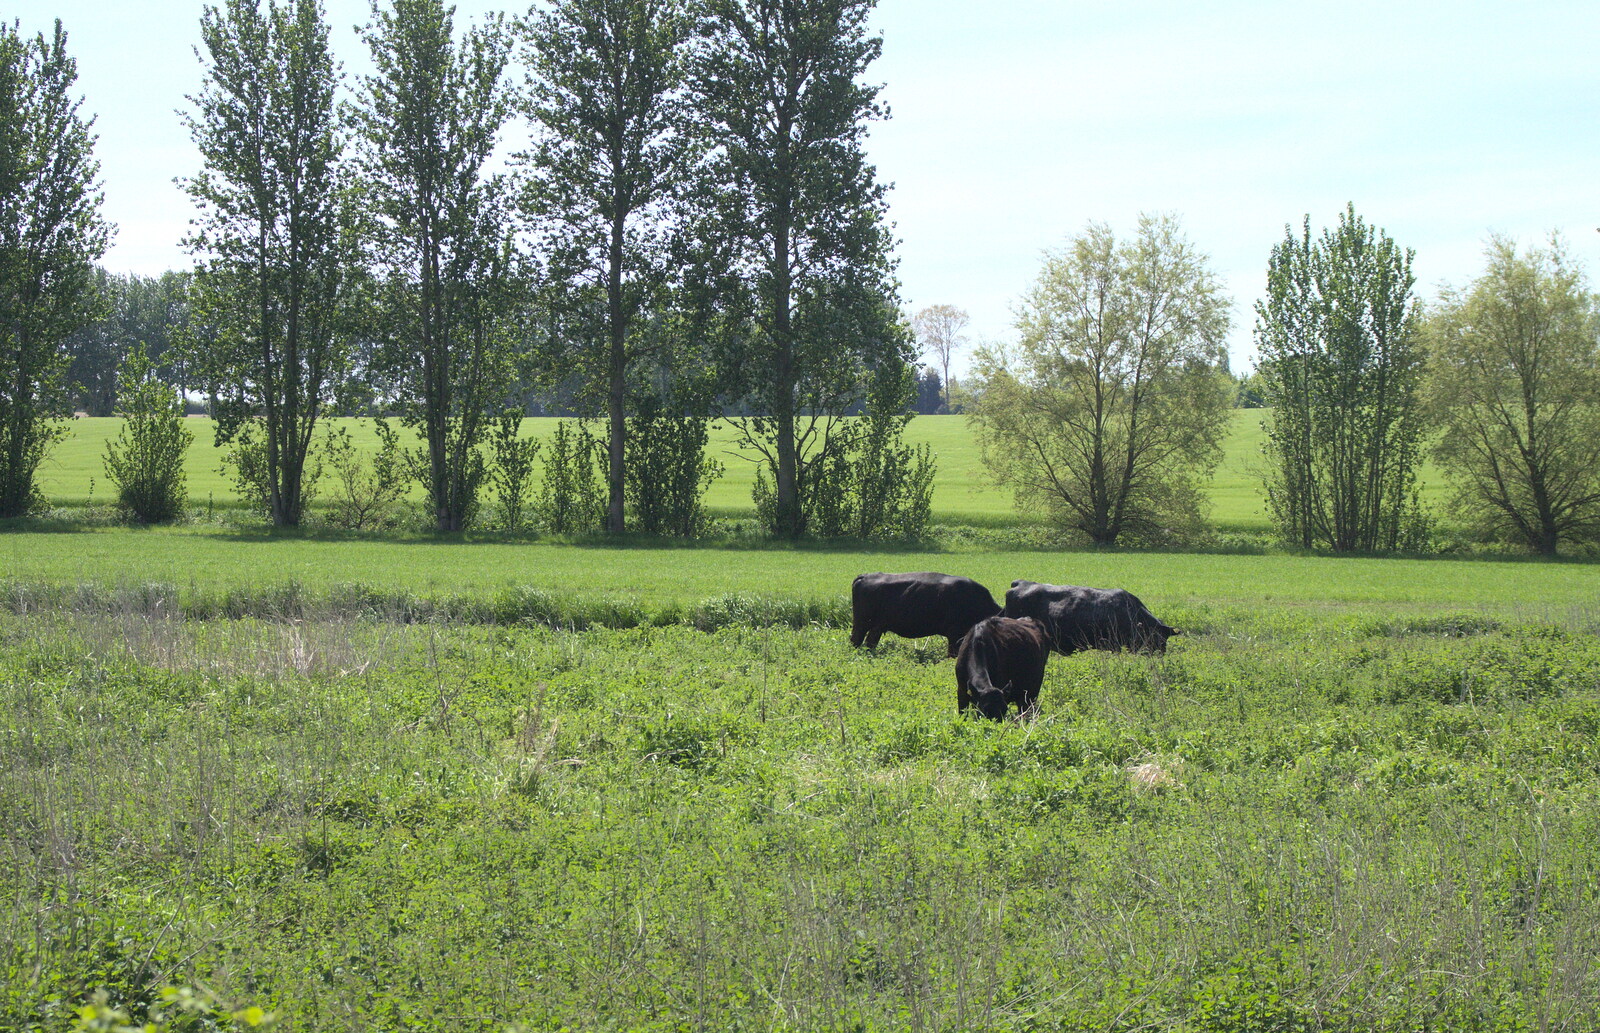 Cows mooch about in the Bure Valley near Buxton from The Bure Valley Railway, Aylsham, Norfolk - 26th May 2013